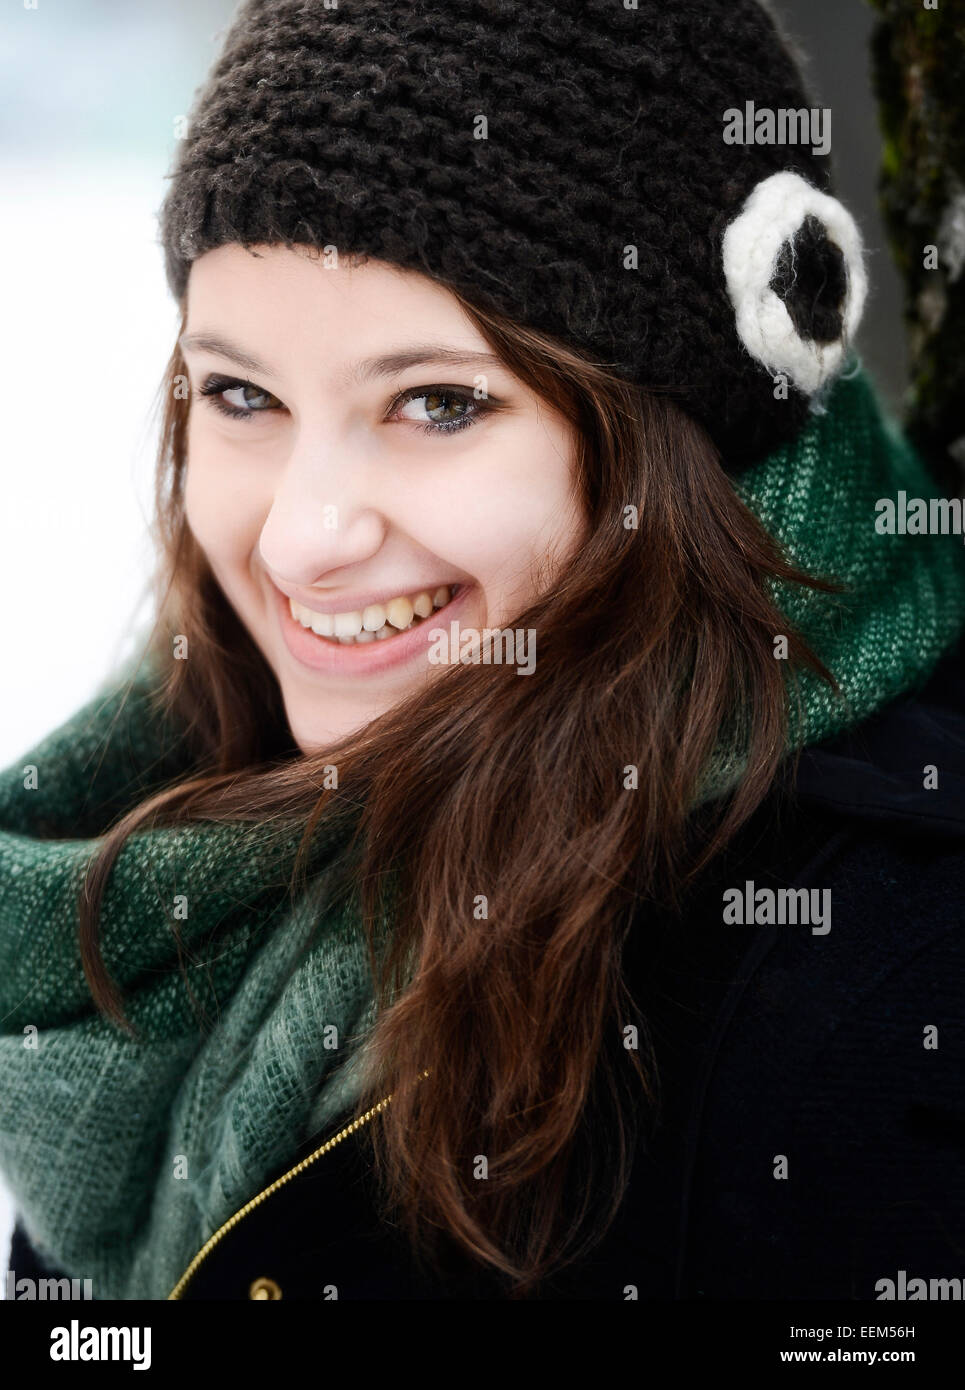 Smiling young woman wearing hat and scarf in winter, portrait Stock Photo